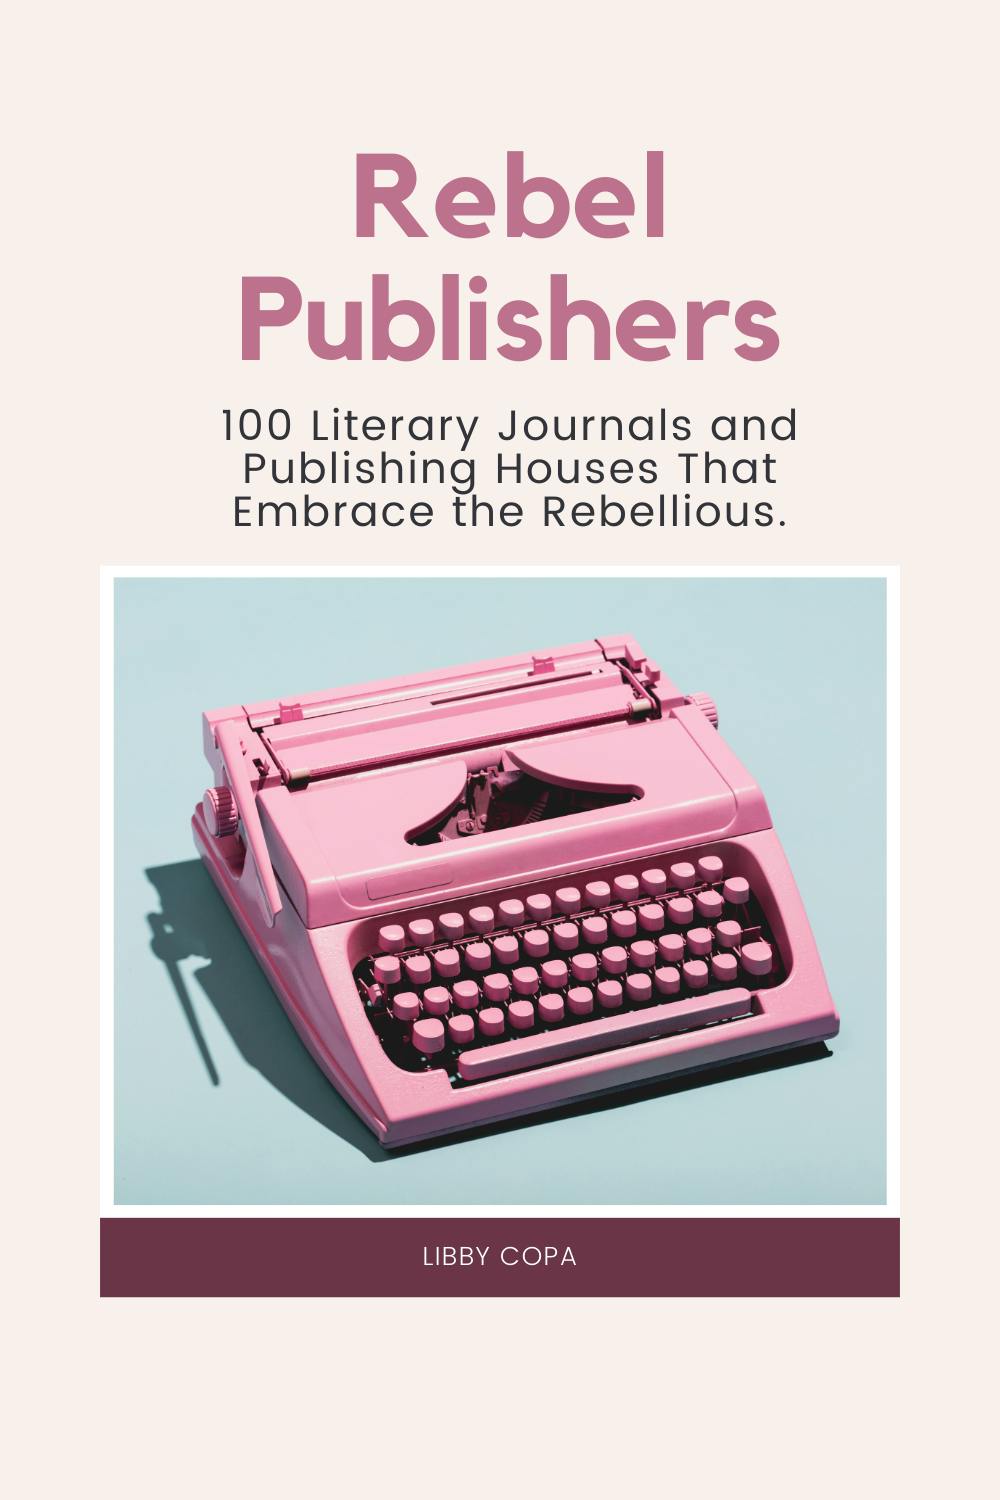 Rebel Publishers: 100 Literary Journals and Publishing Houses That Embrace the Rebellious